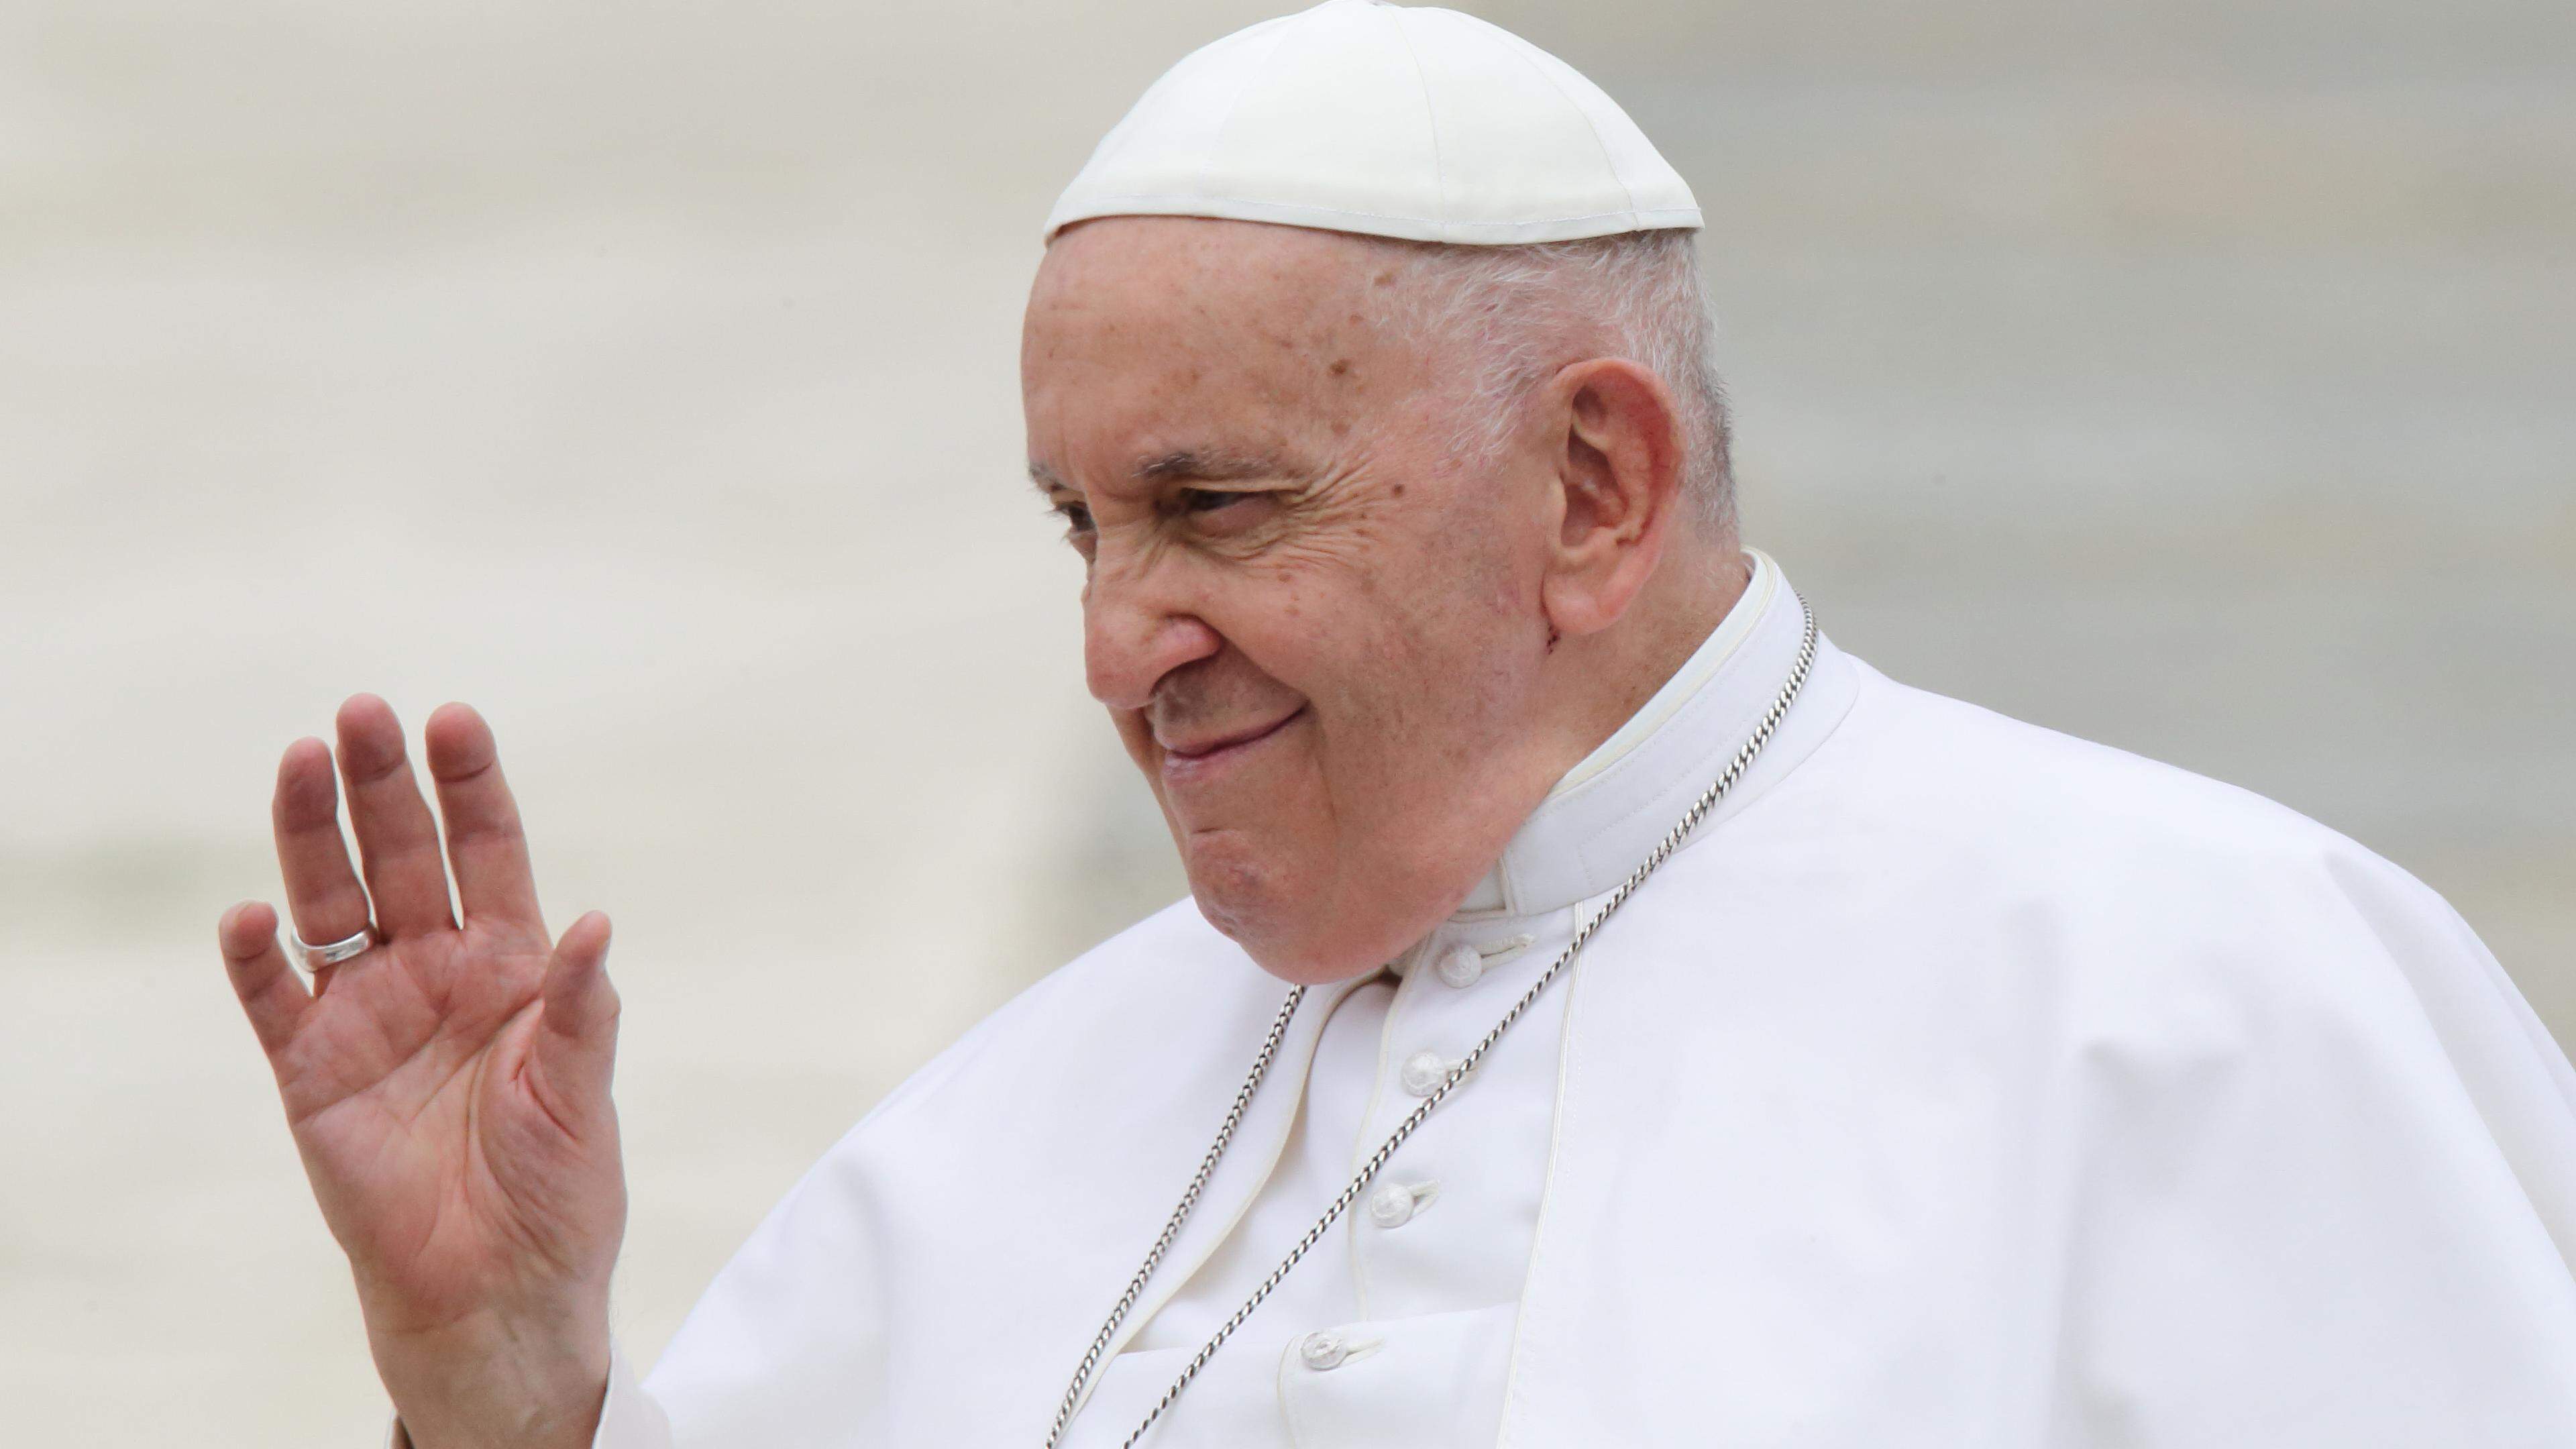 Pope Francis will make his first visit to Luxembourg in September